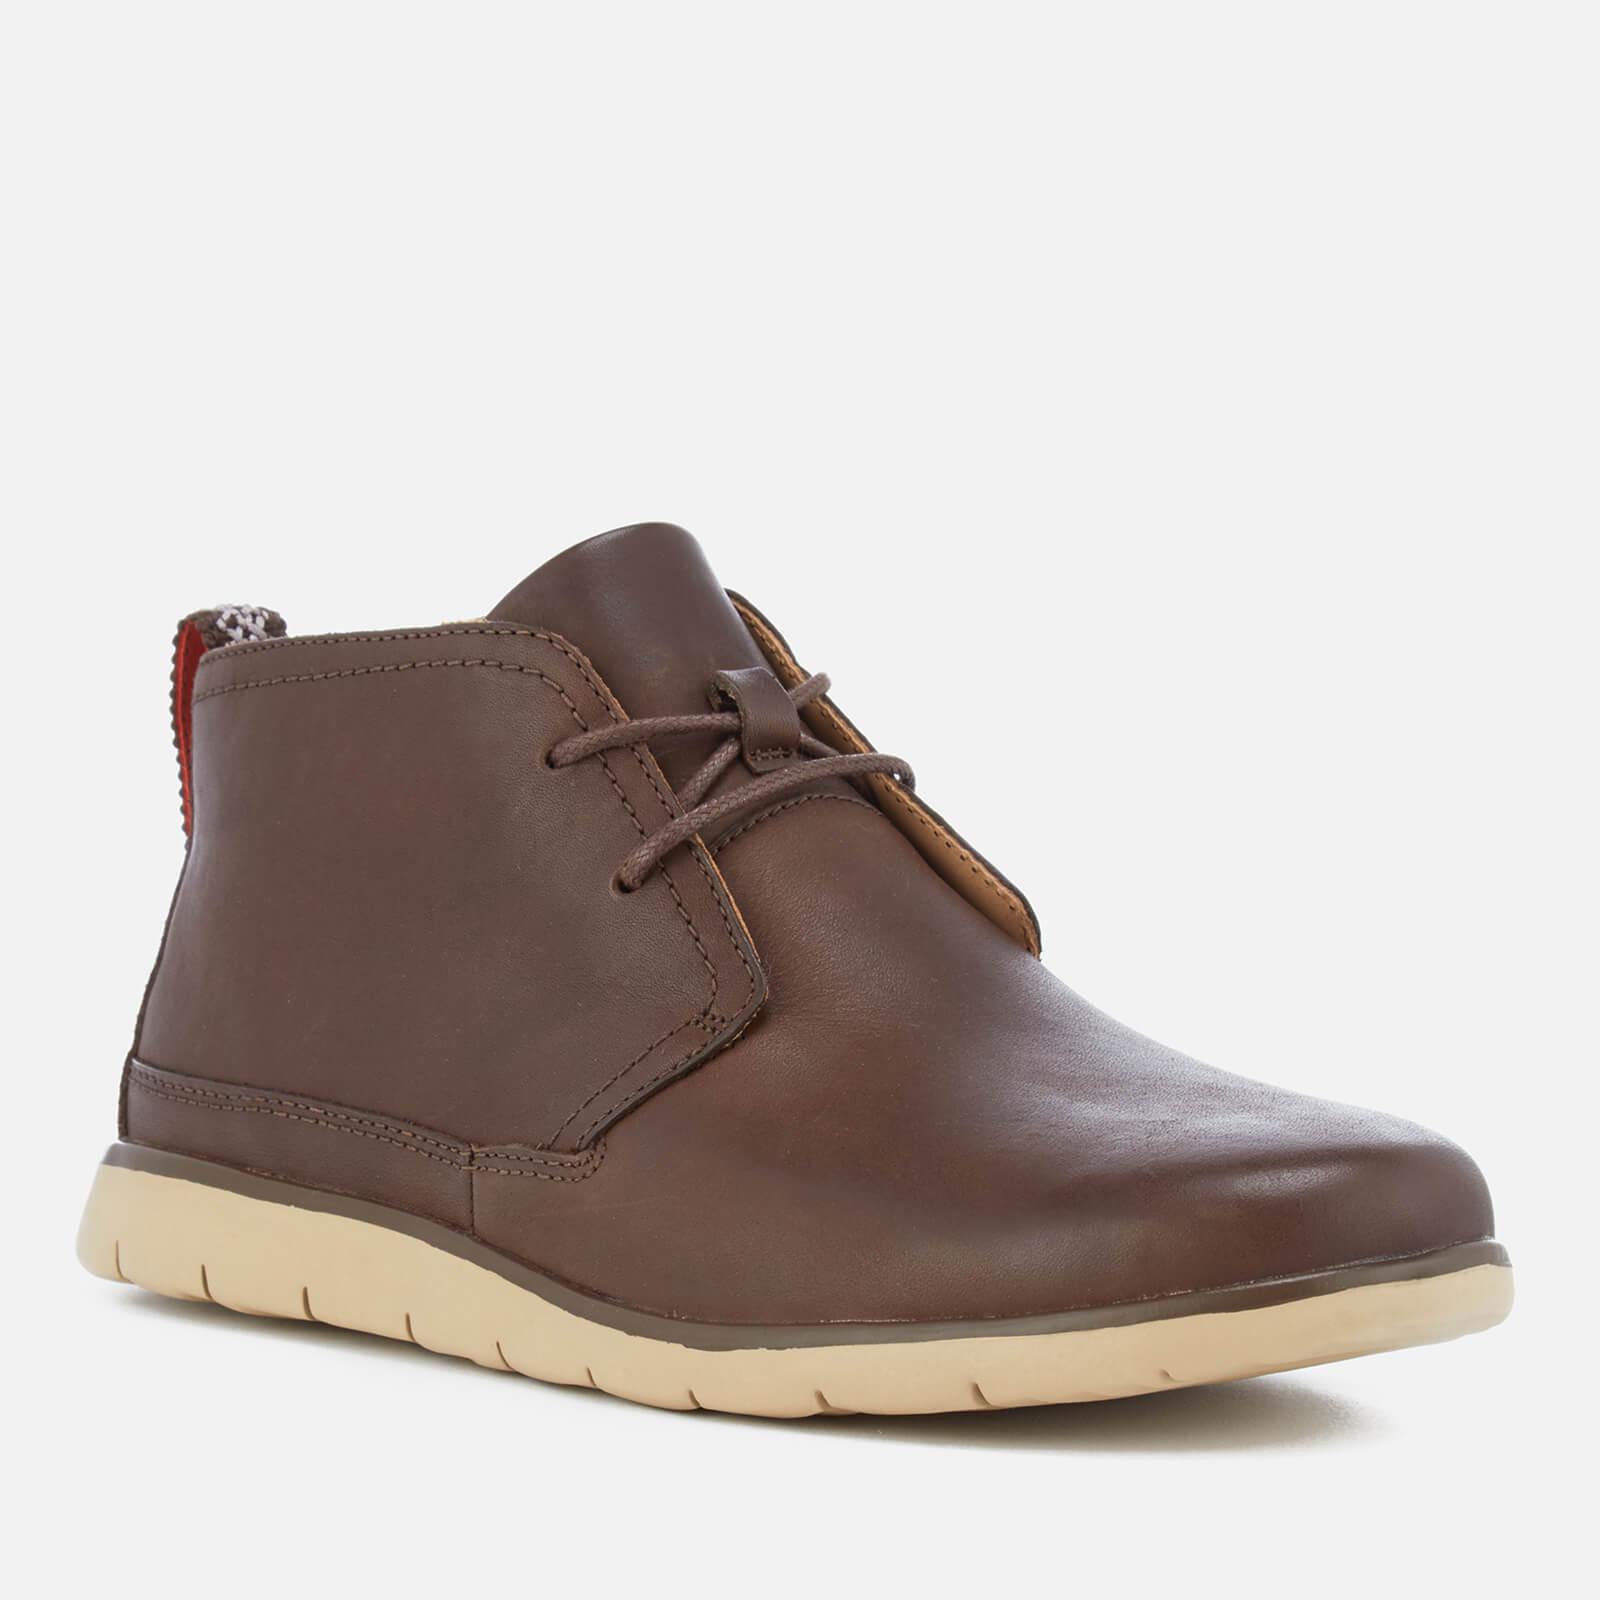 UGG Leather Freamon Waterproof Chukka Boots in Brown for Men - Lyst